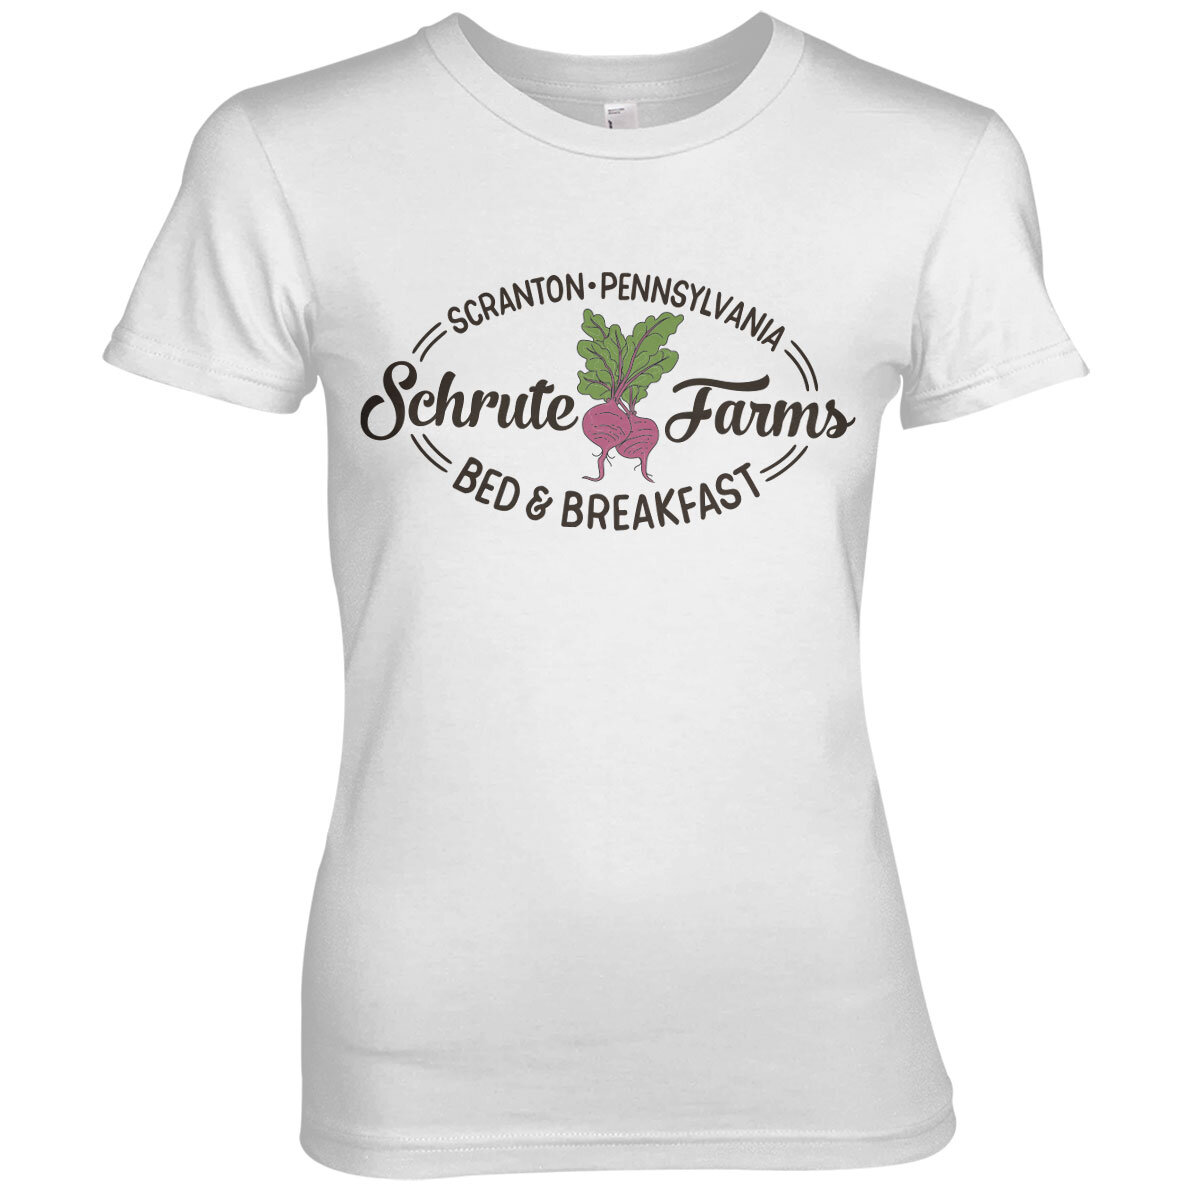 Schrute Farms - Bed & Breakfast Girly Tee